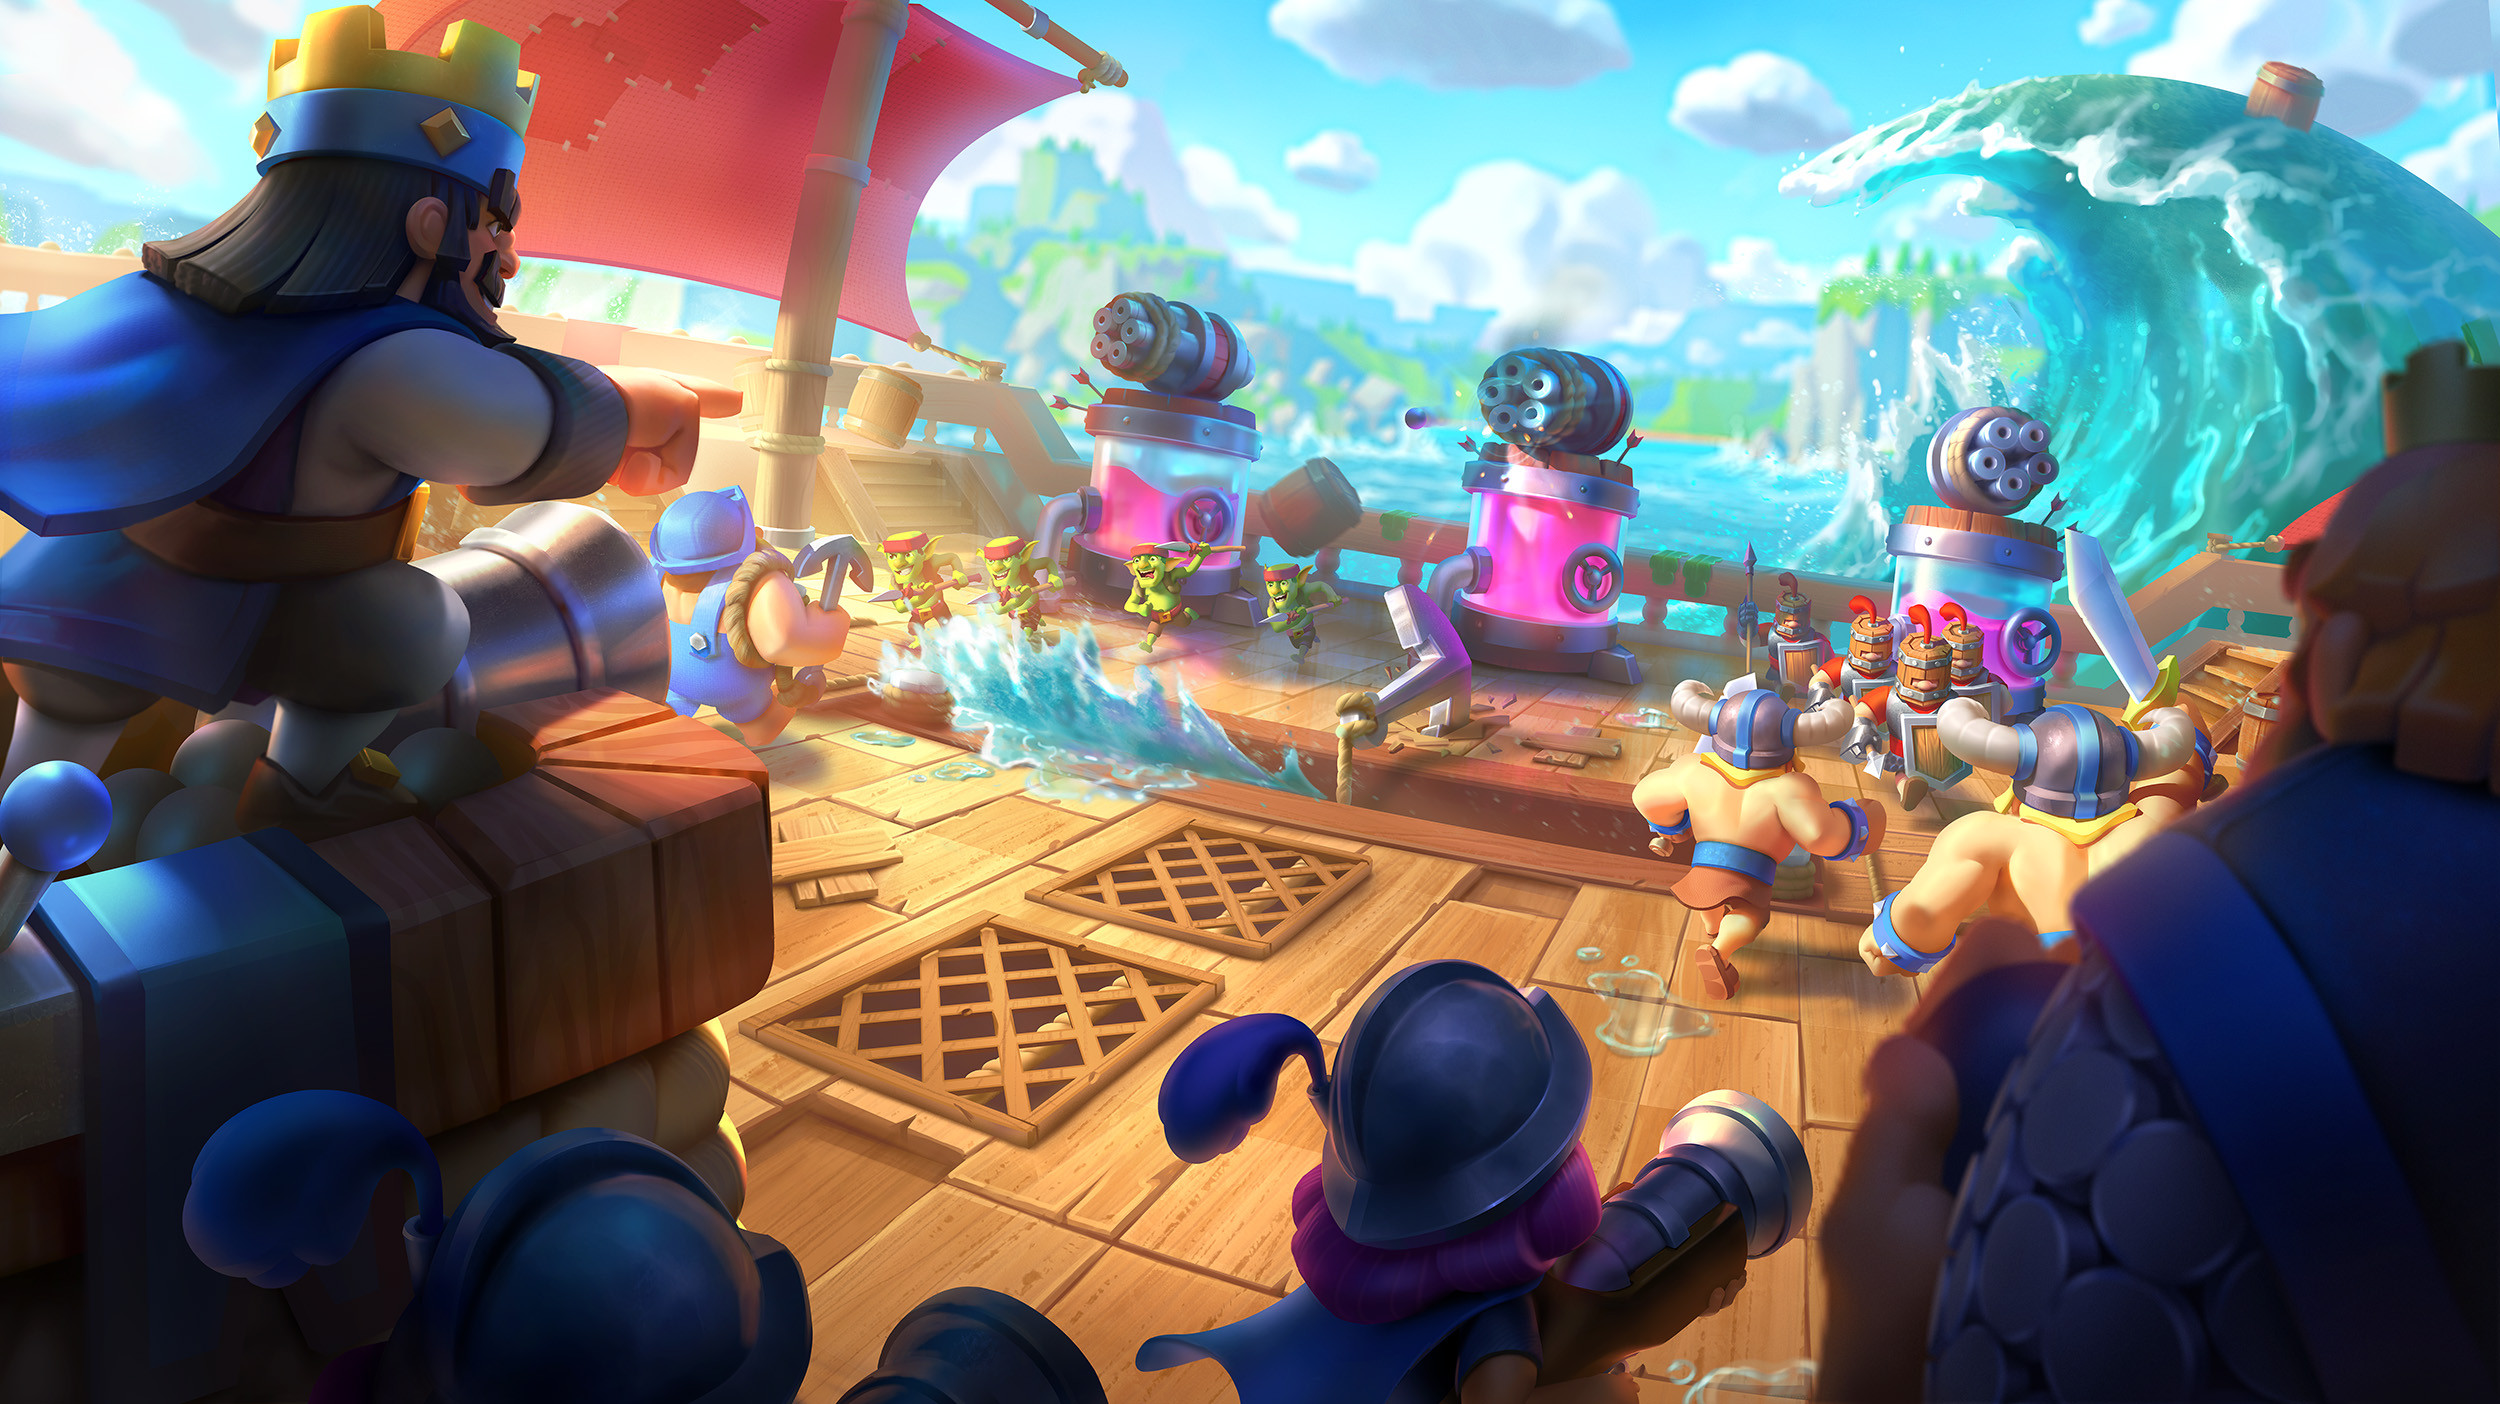 ArtStation - scuffed clash royale images